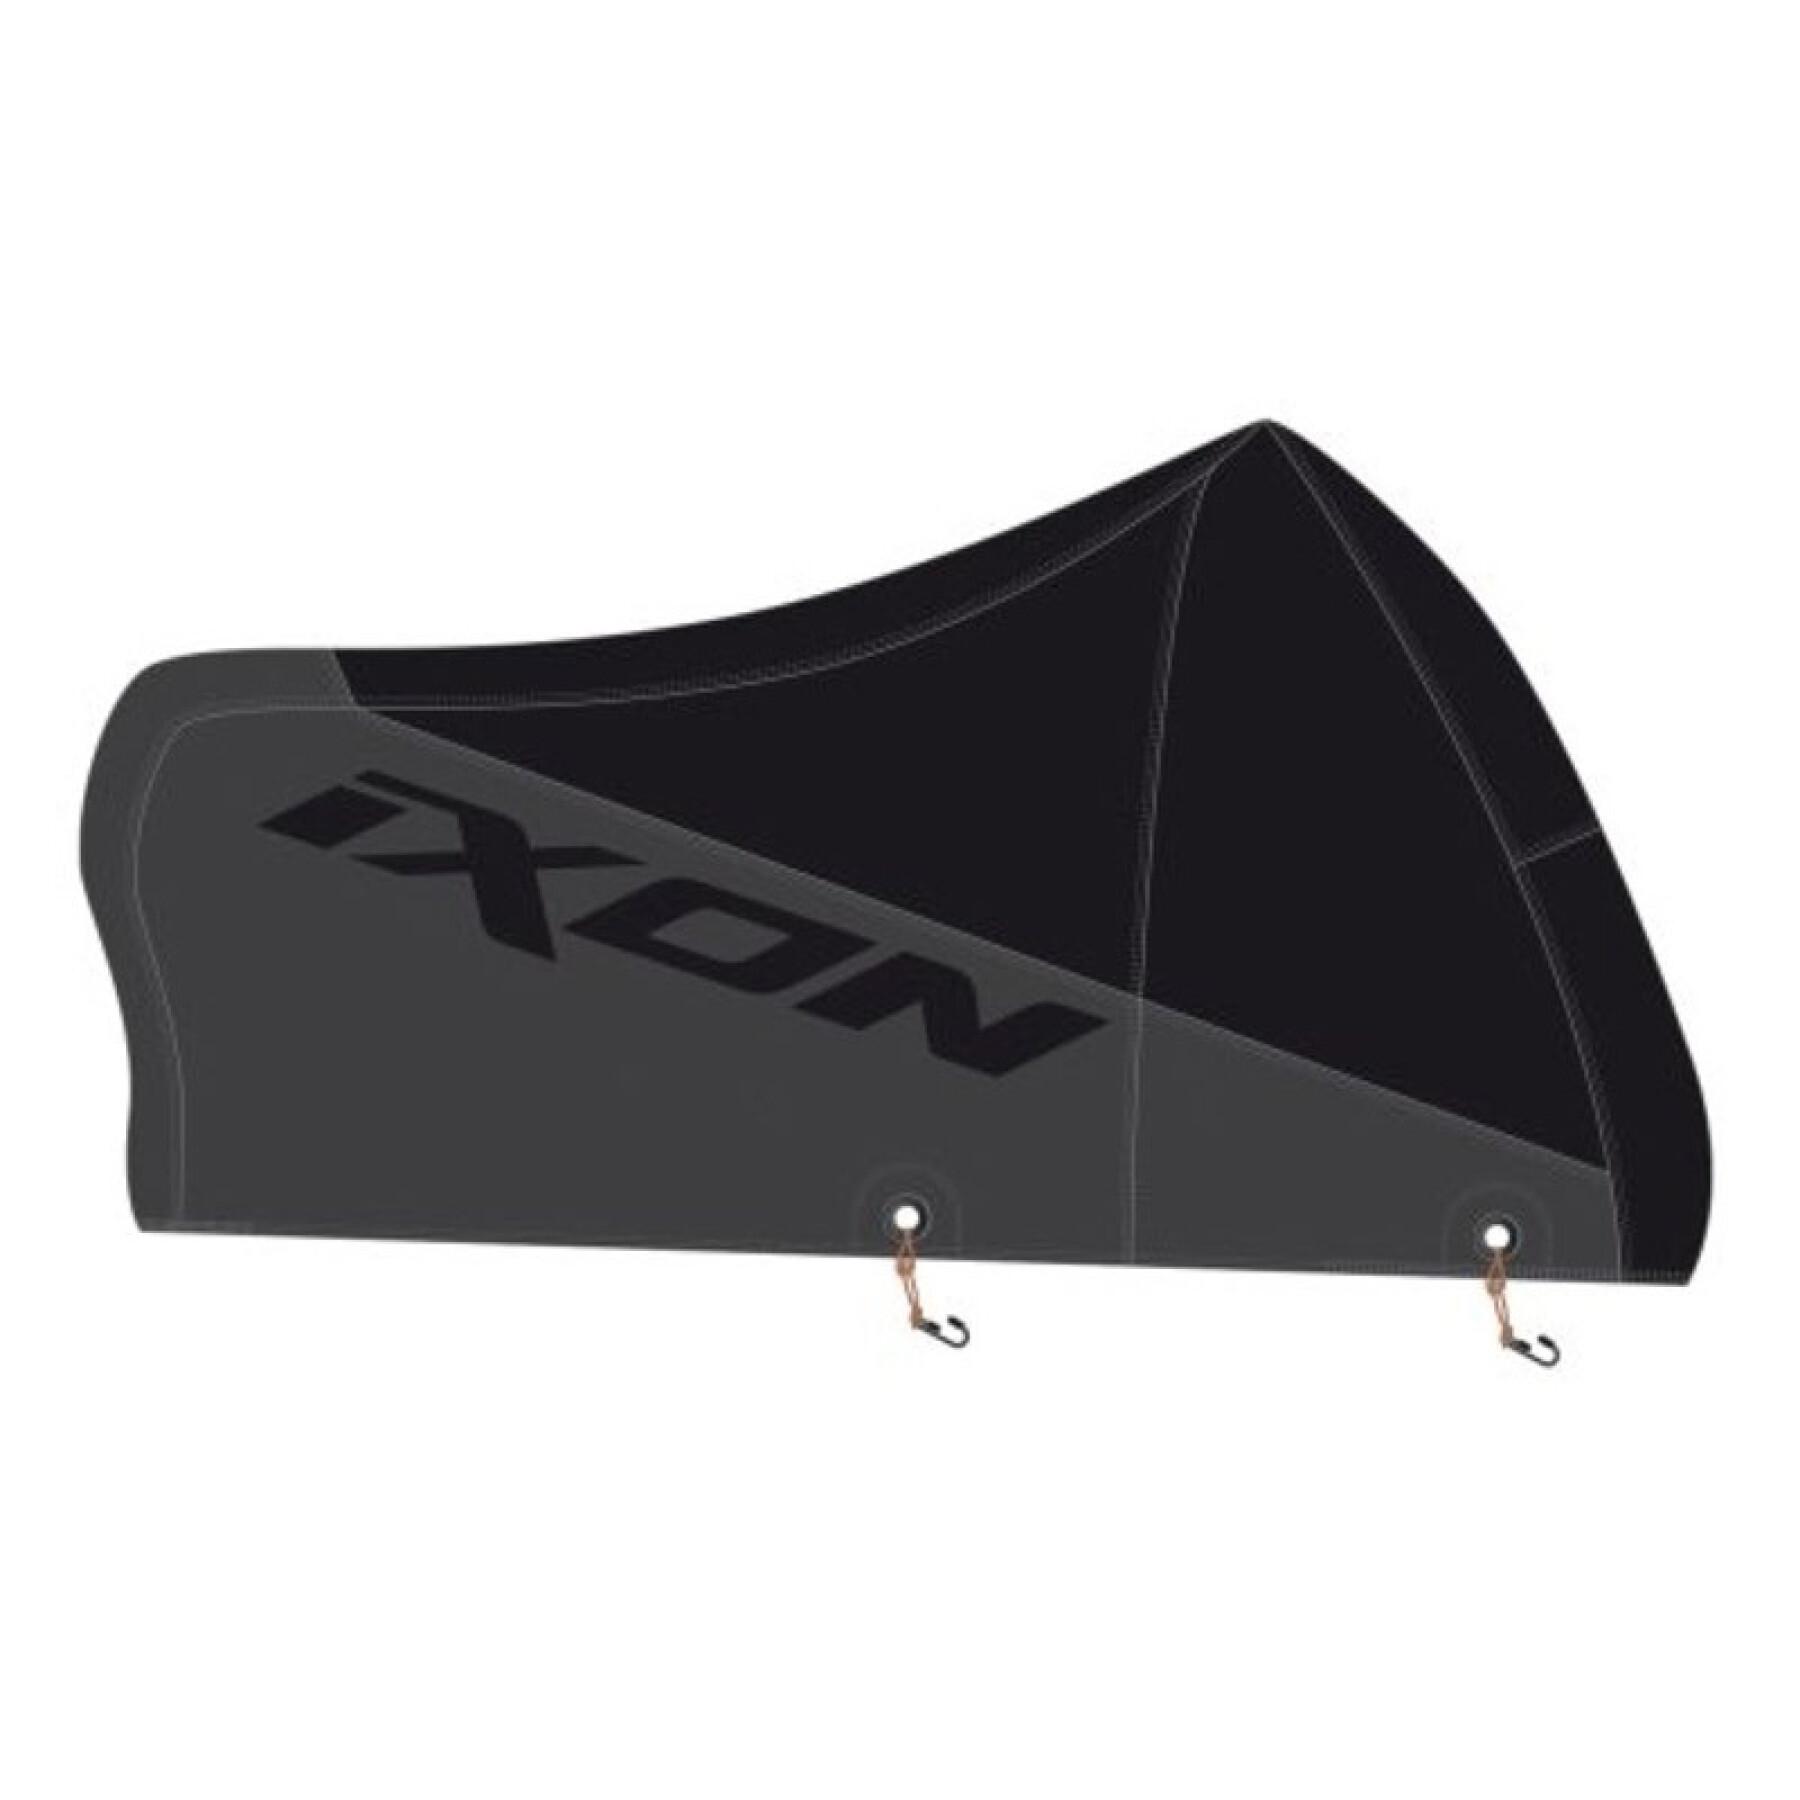 Motorcycle cover for customs/gt/maxi scooters Ixon Blanky